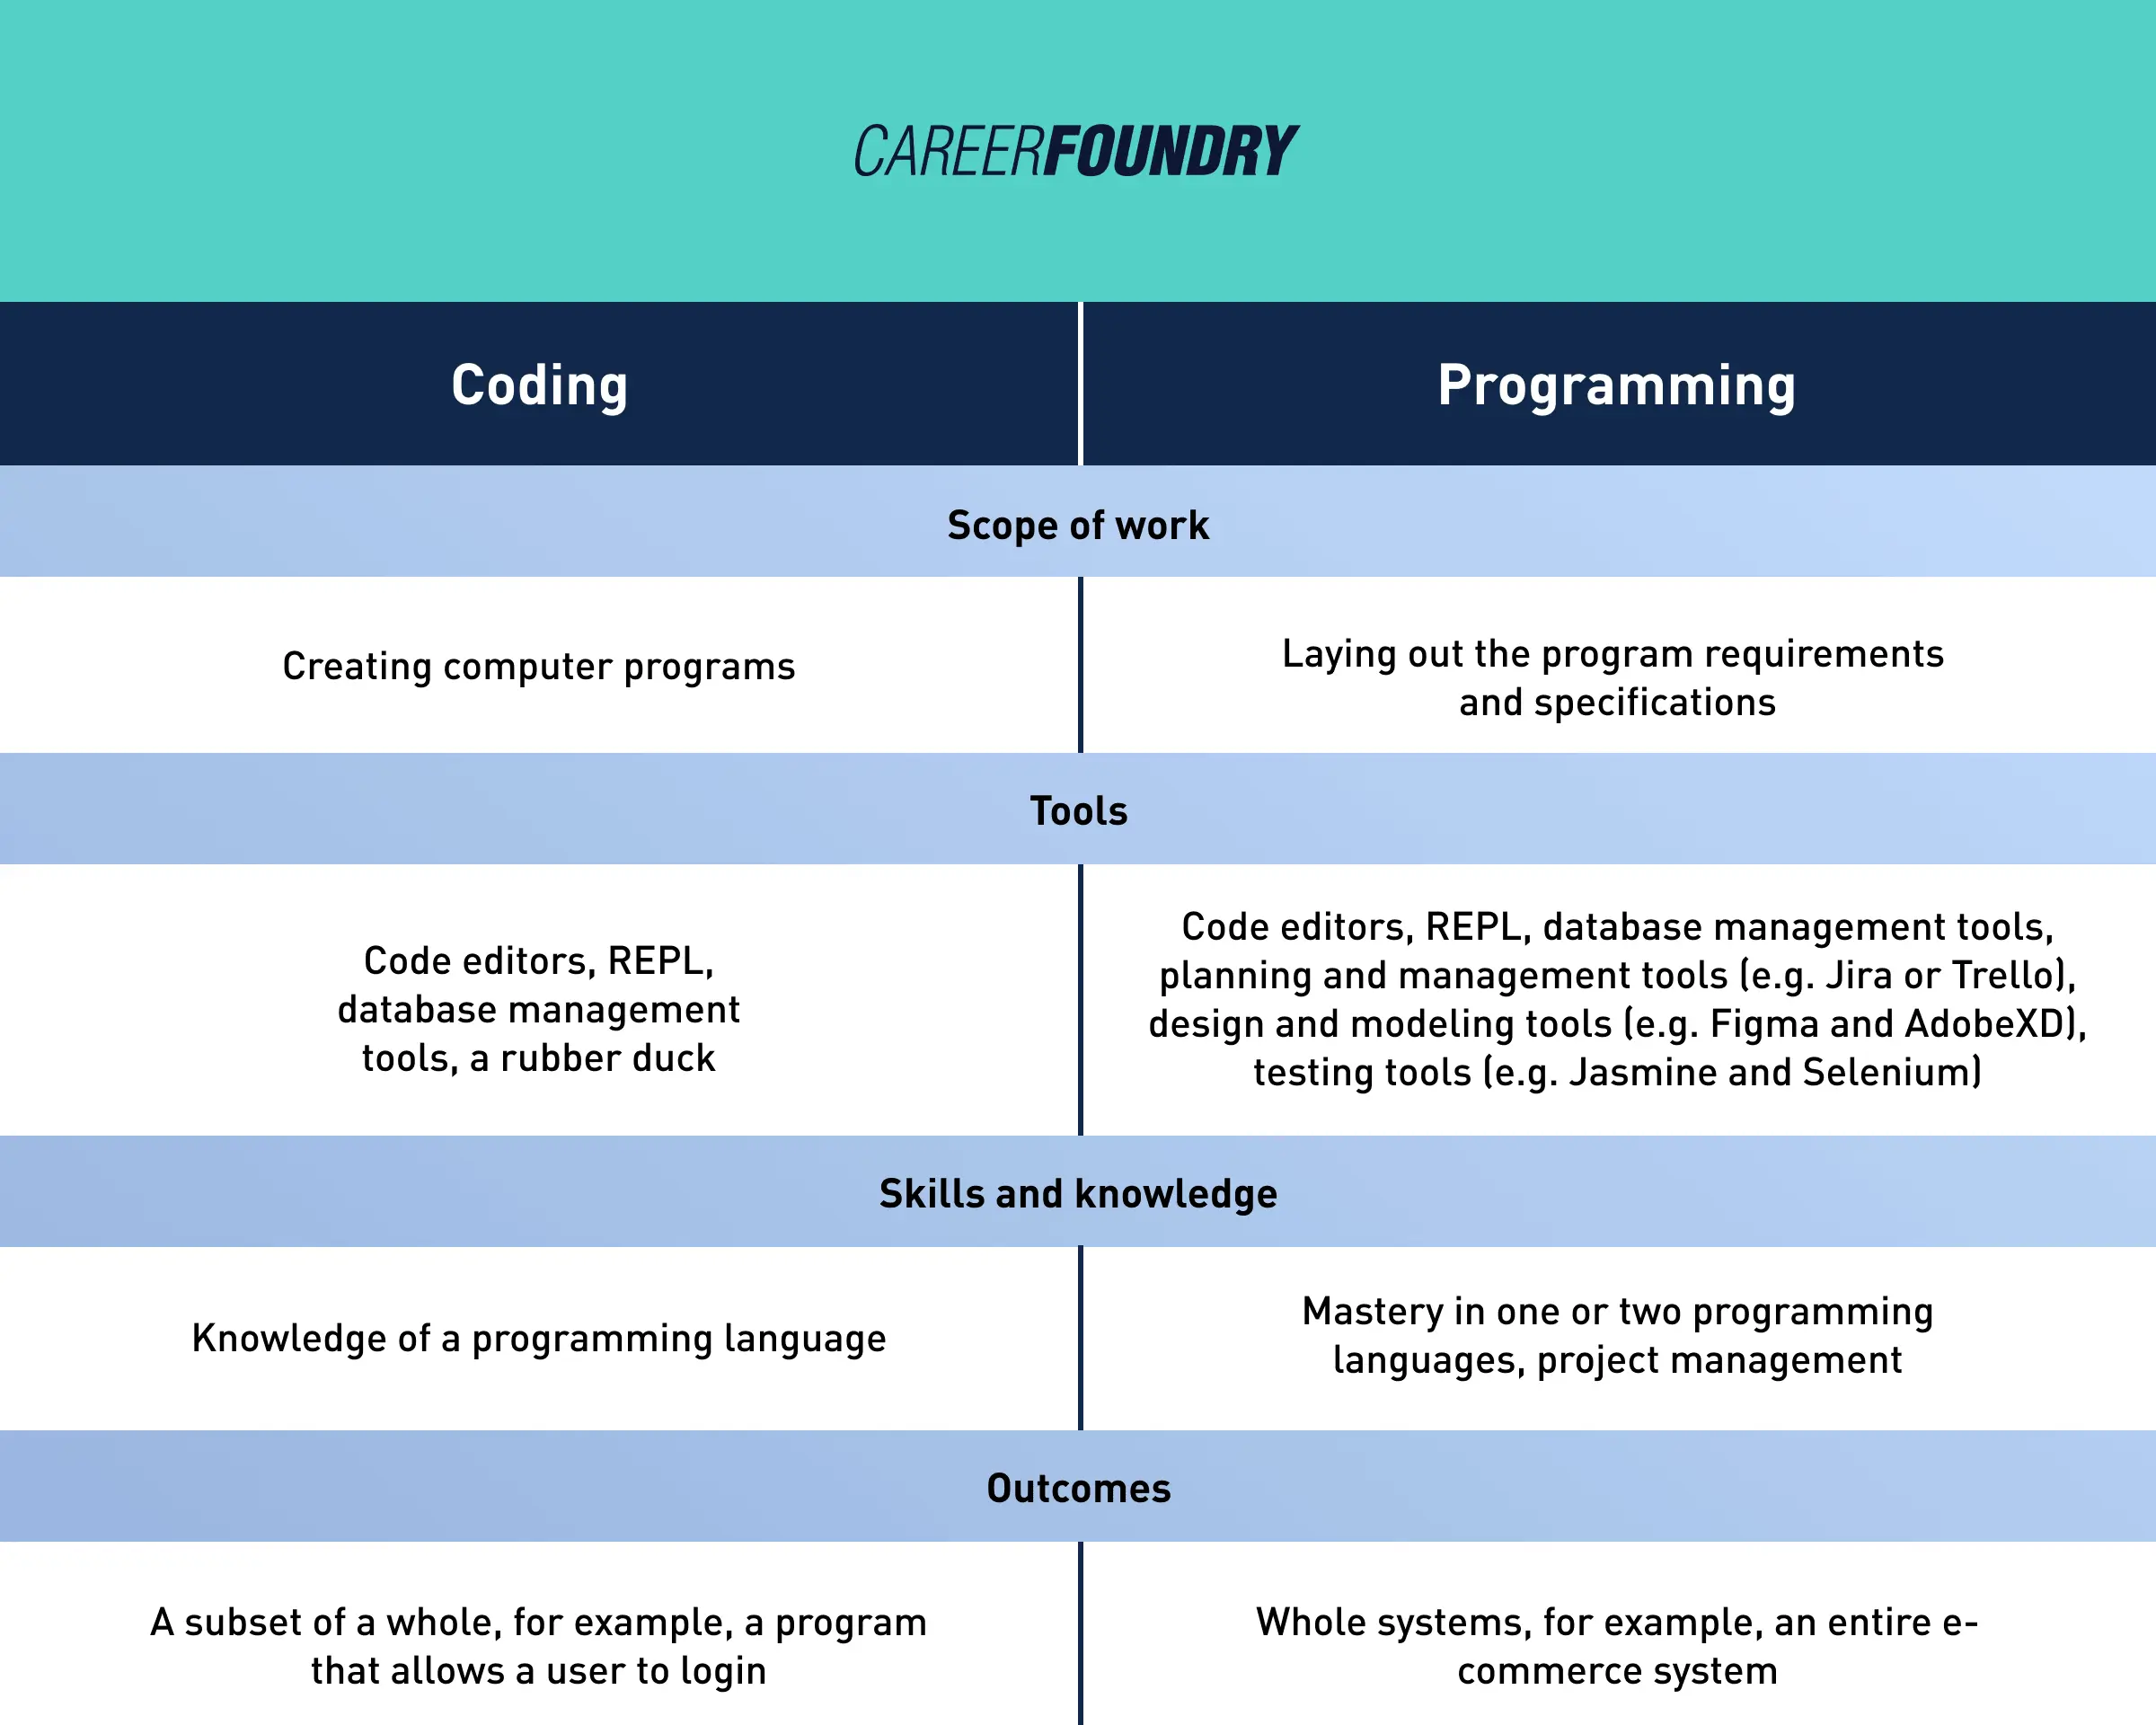 A table comparing coding and programming under the headings scope of work, tools, skills and knowledge, and outcomes.